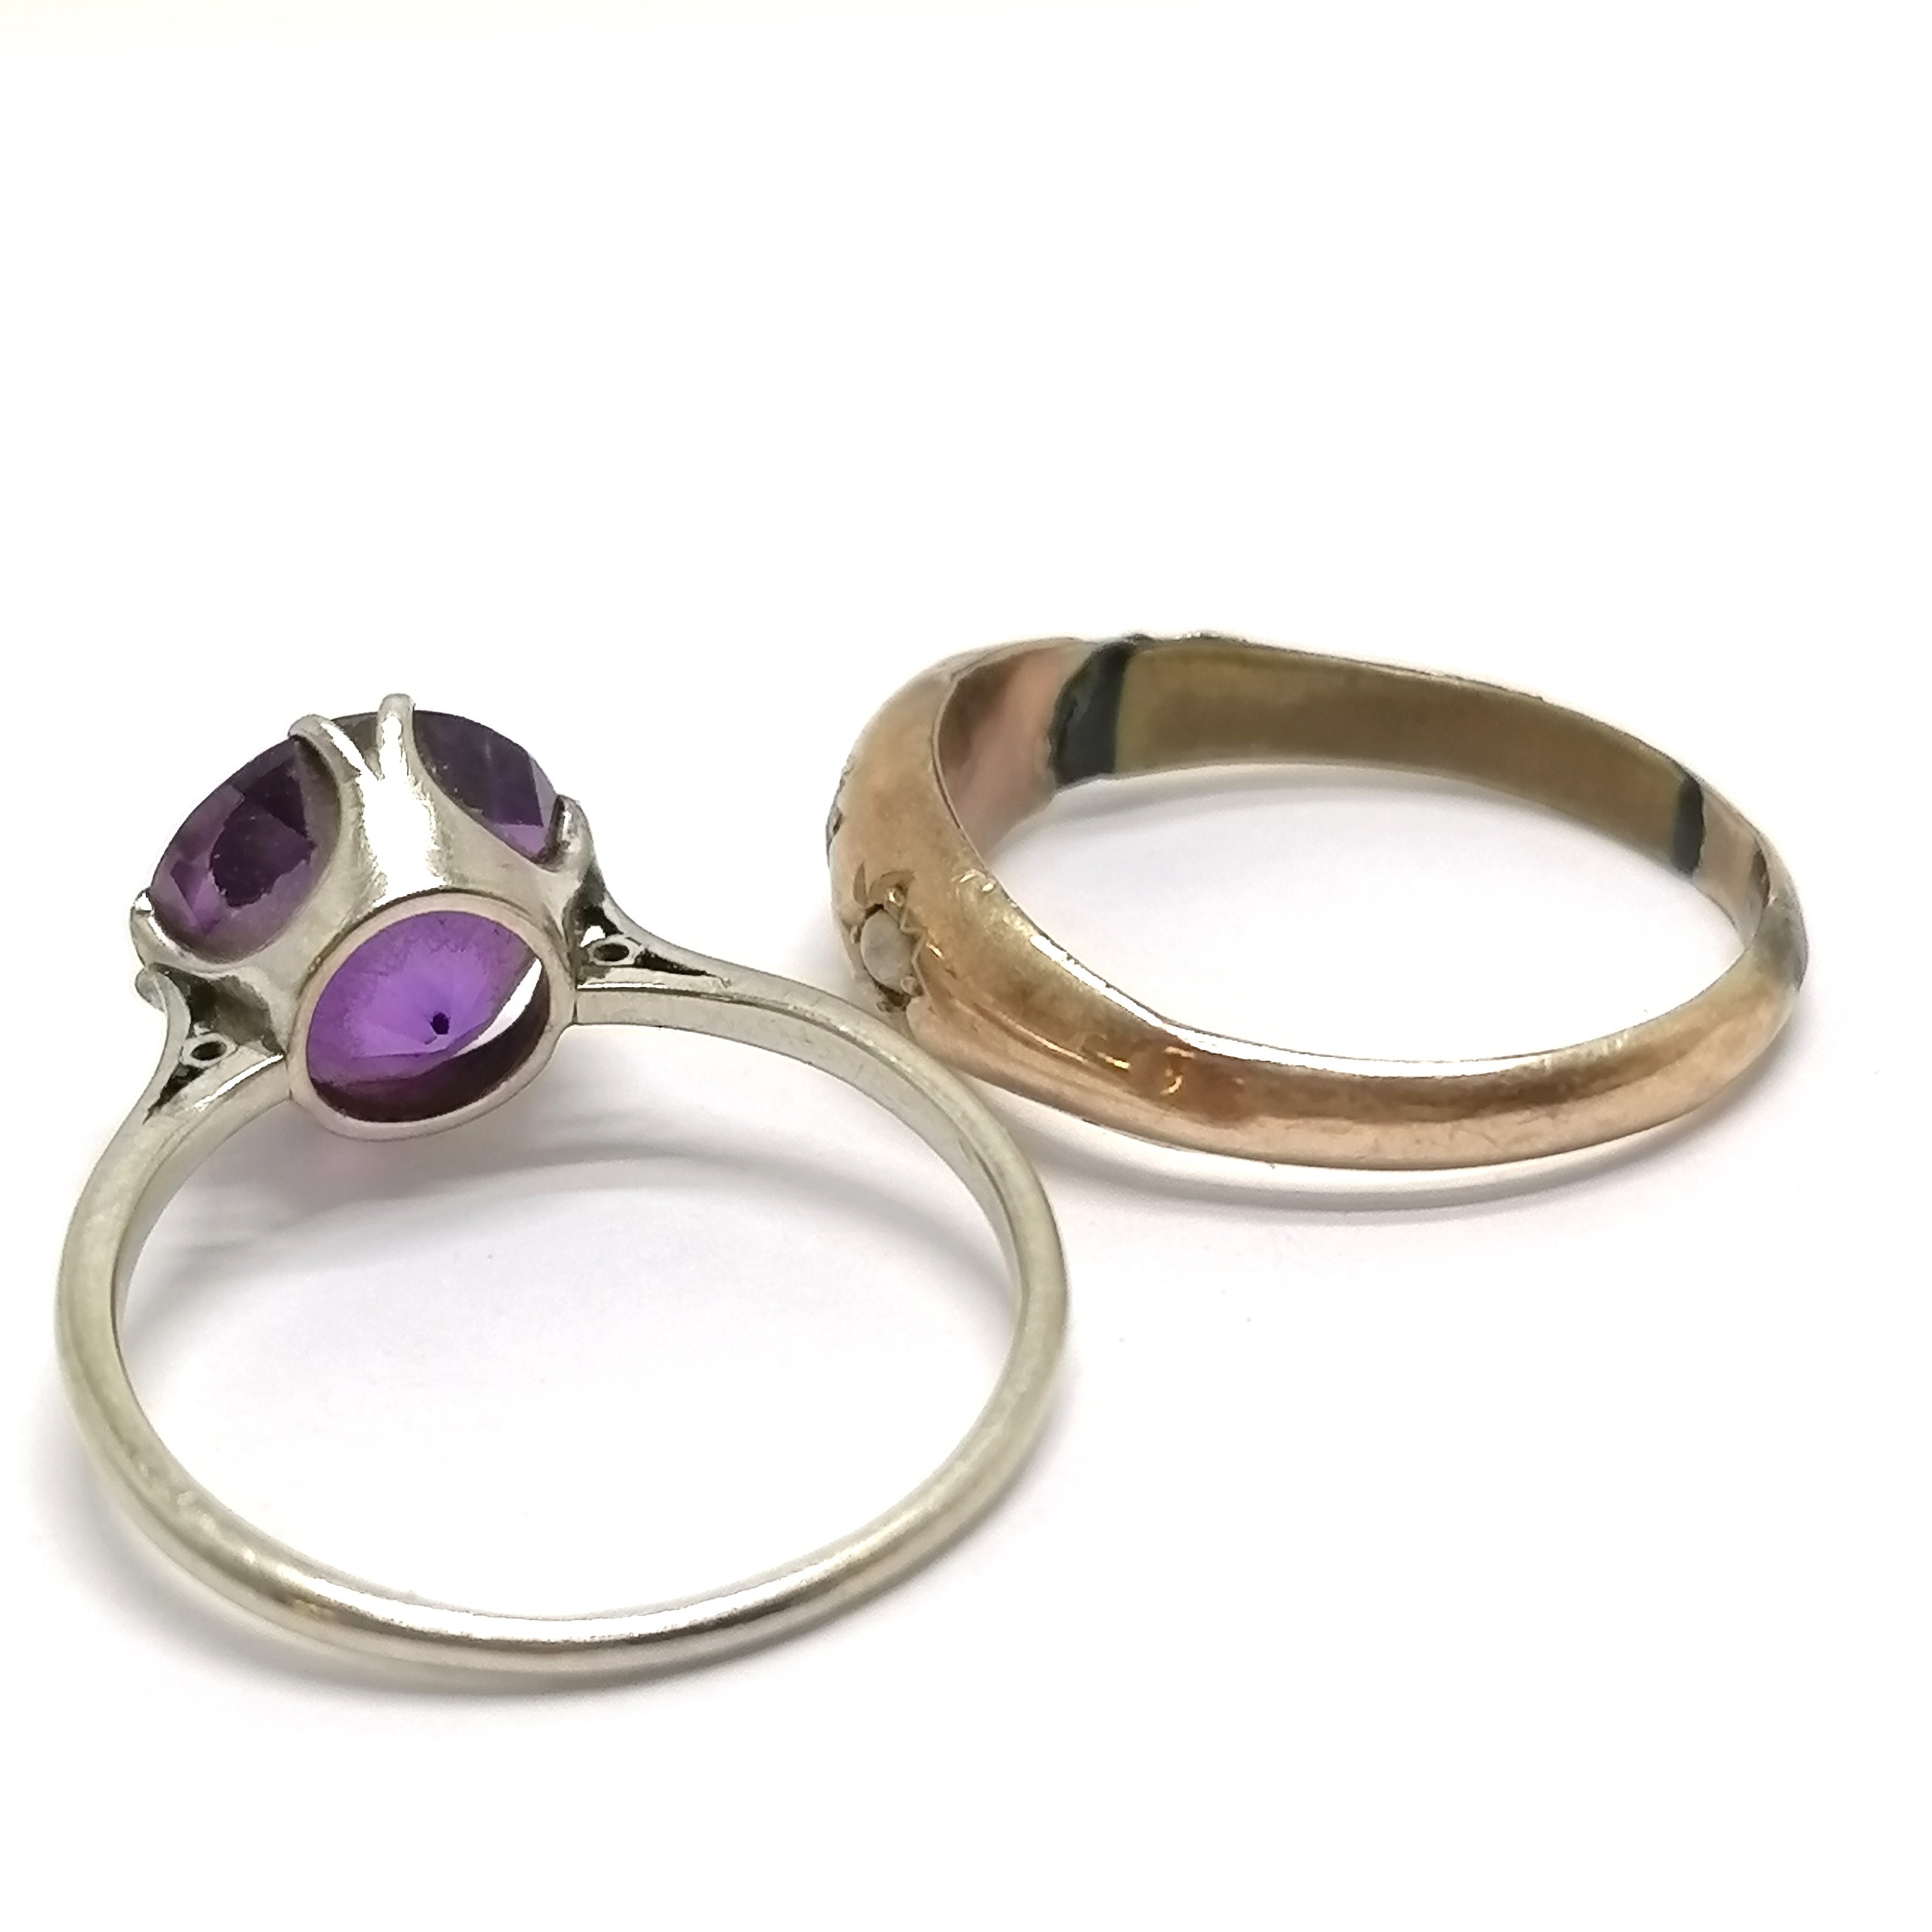 2 x antique gold rings - garnet & pearl (1 missing) and amethyst - both a/f & total weight 3g - Image 2 of 3